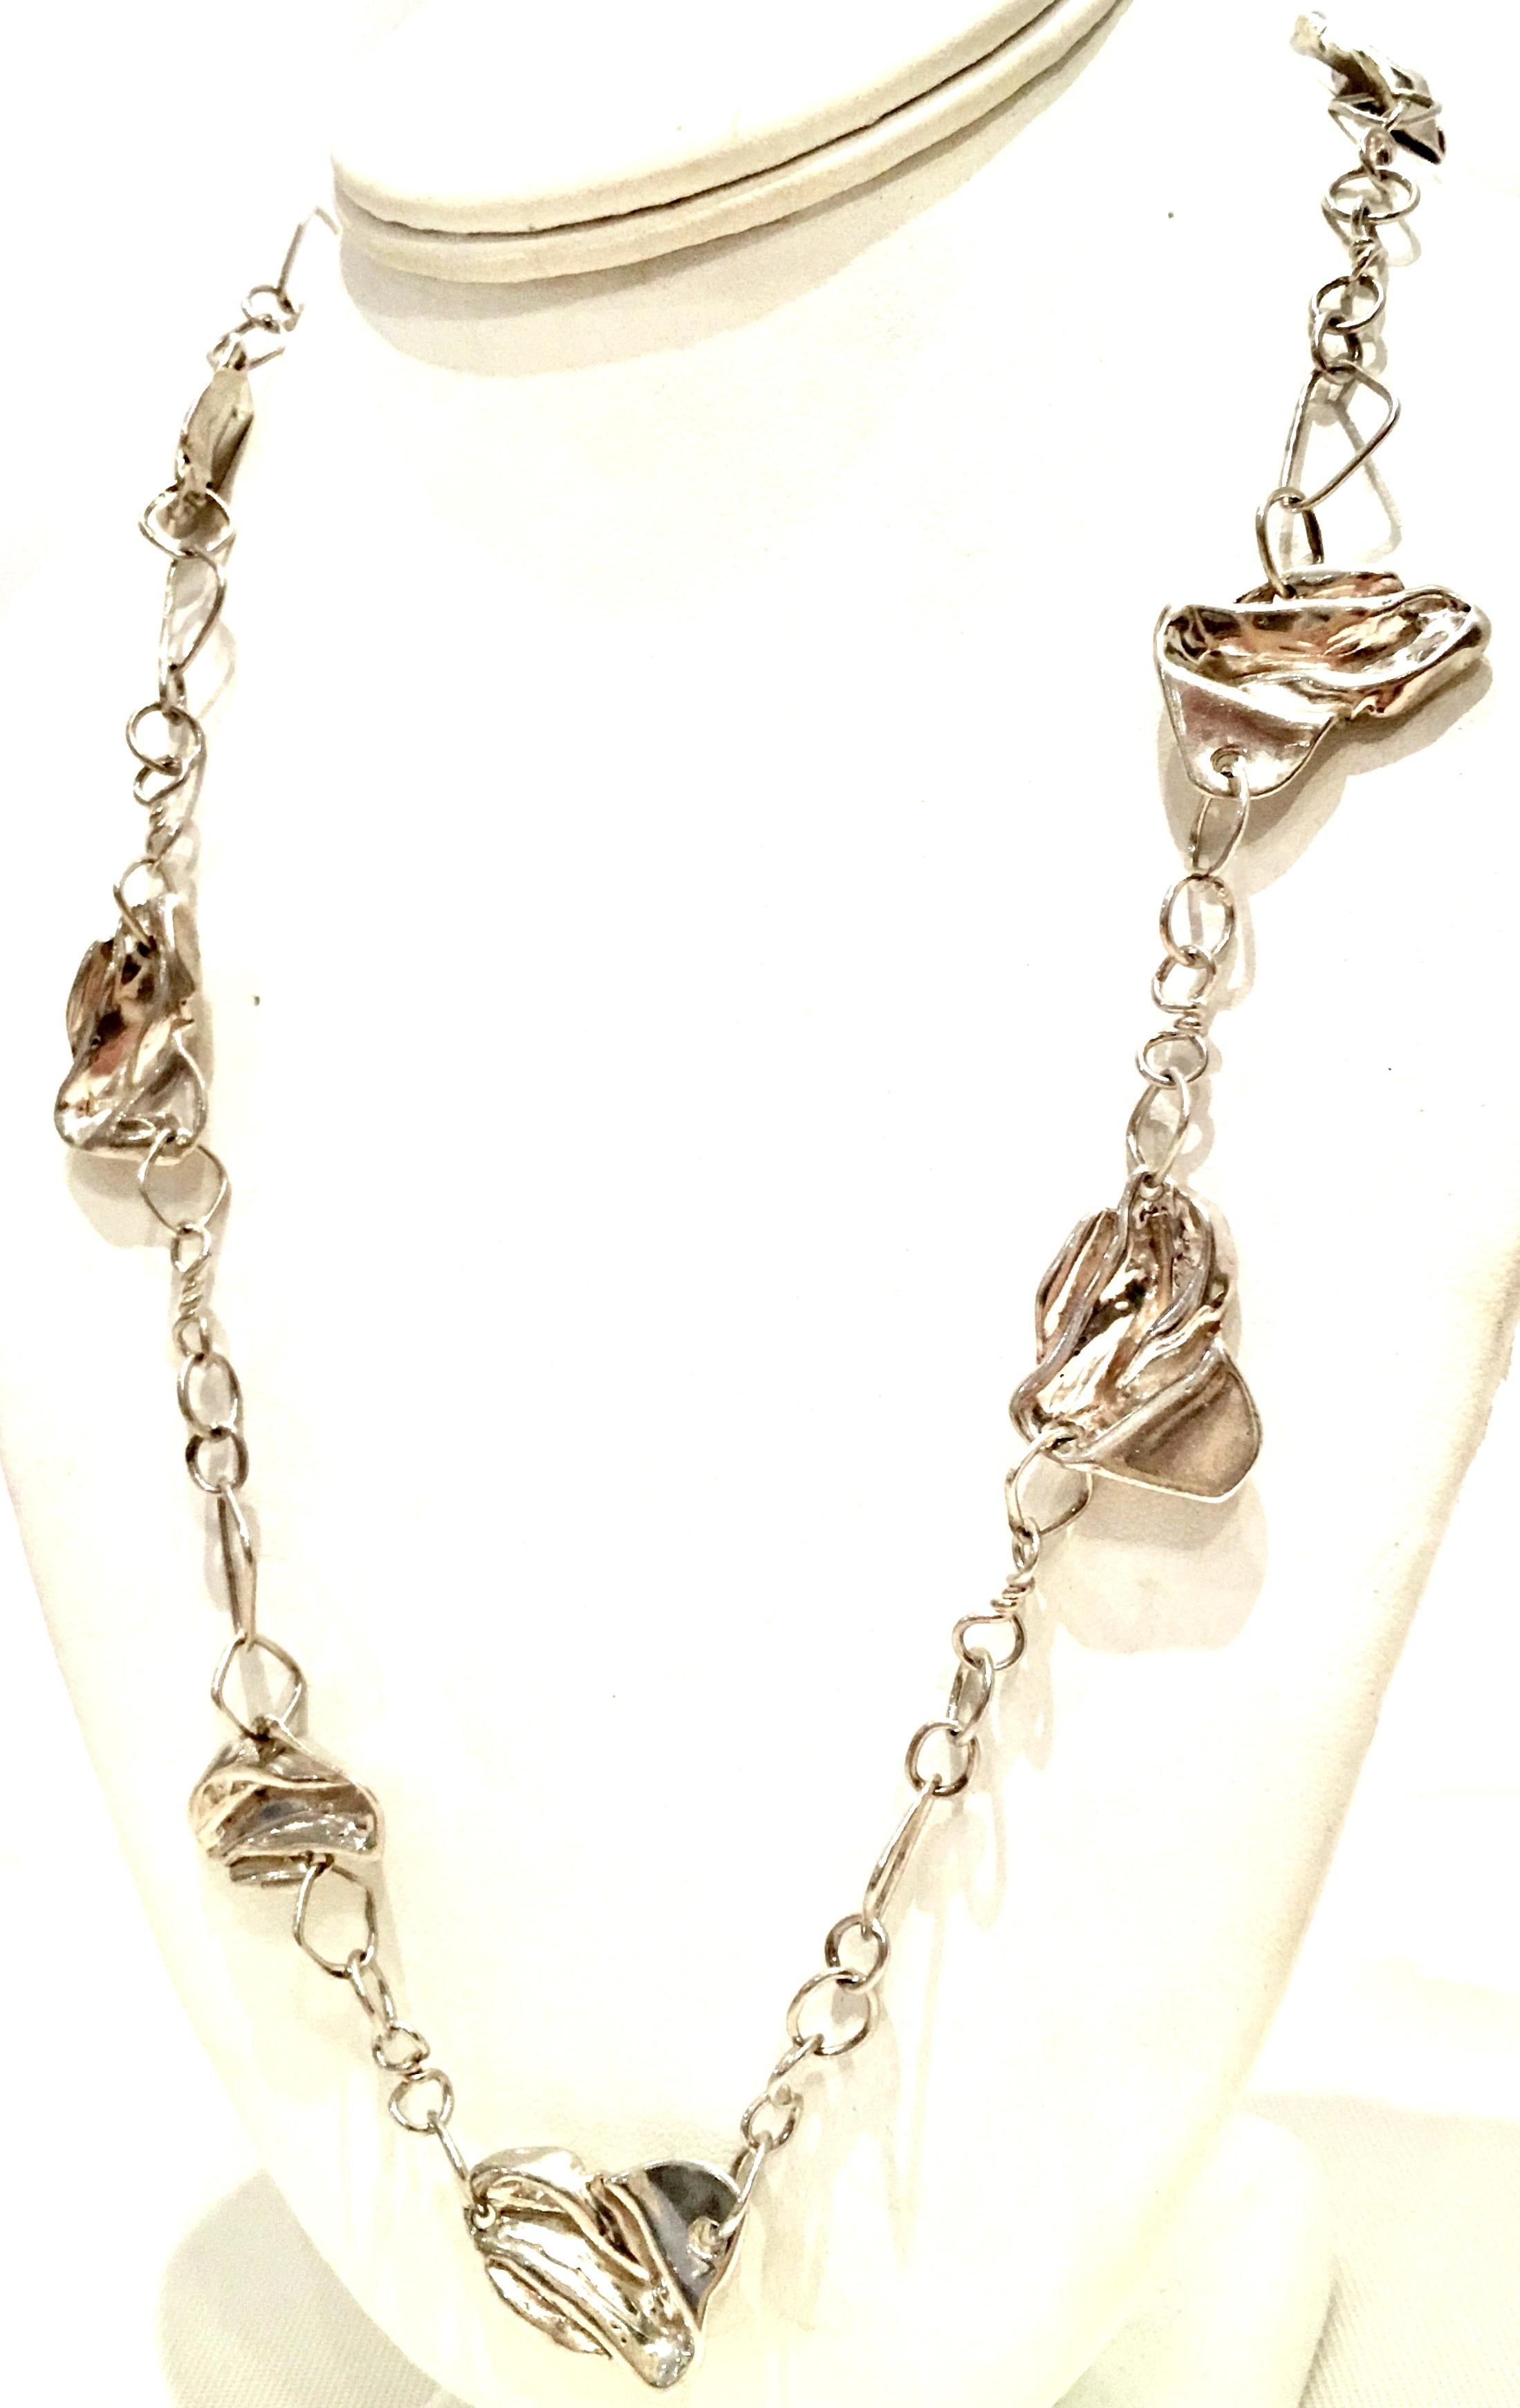 Vintage Sterling Silver Modernist Organic Form Chain Link Necklace In Good Condition For Sale In West Palm Beach, FL